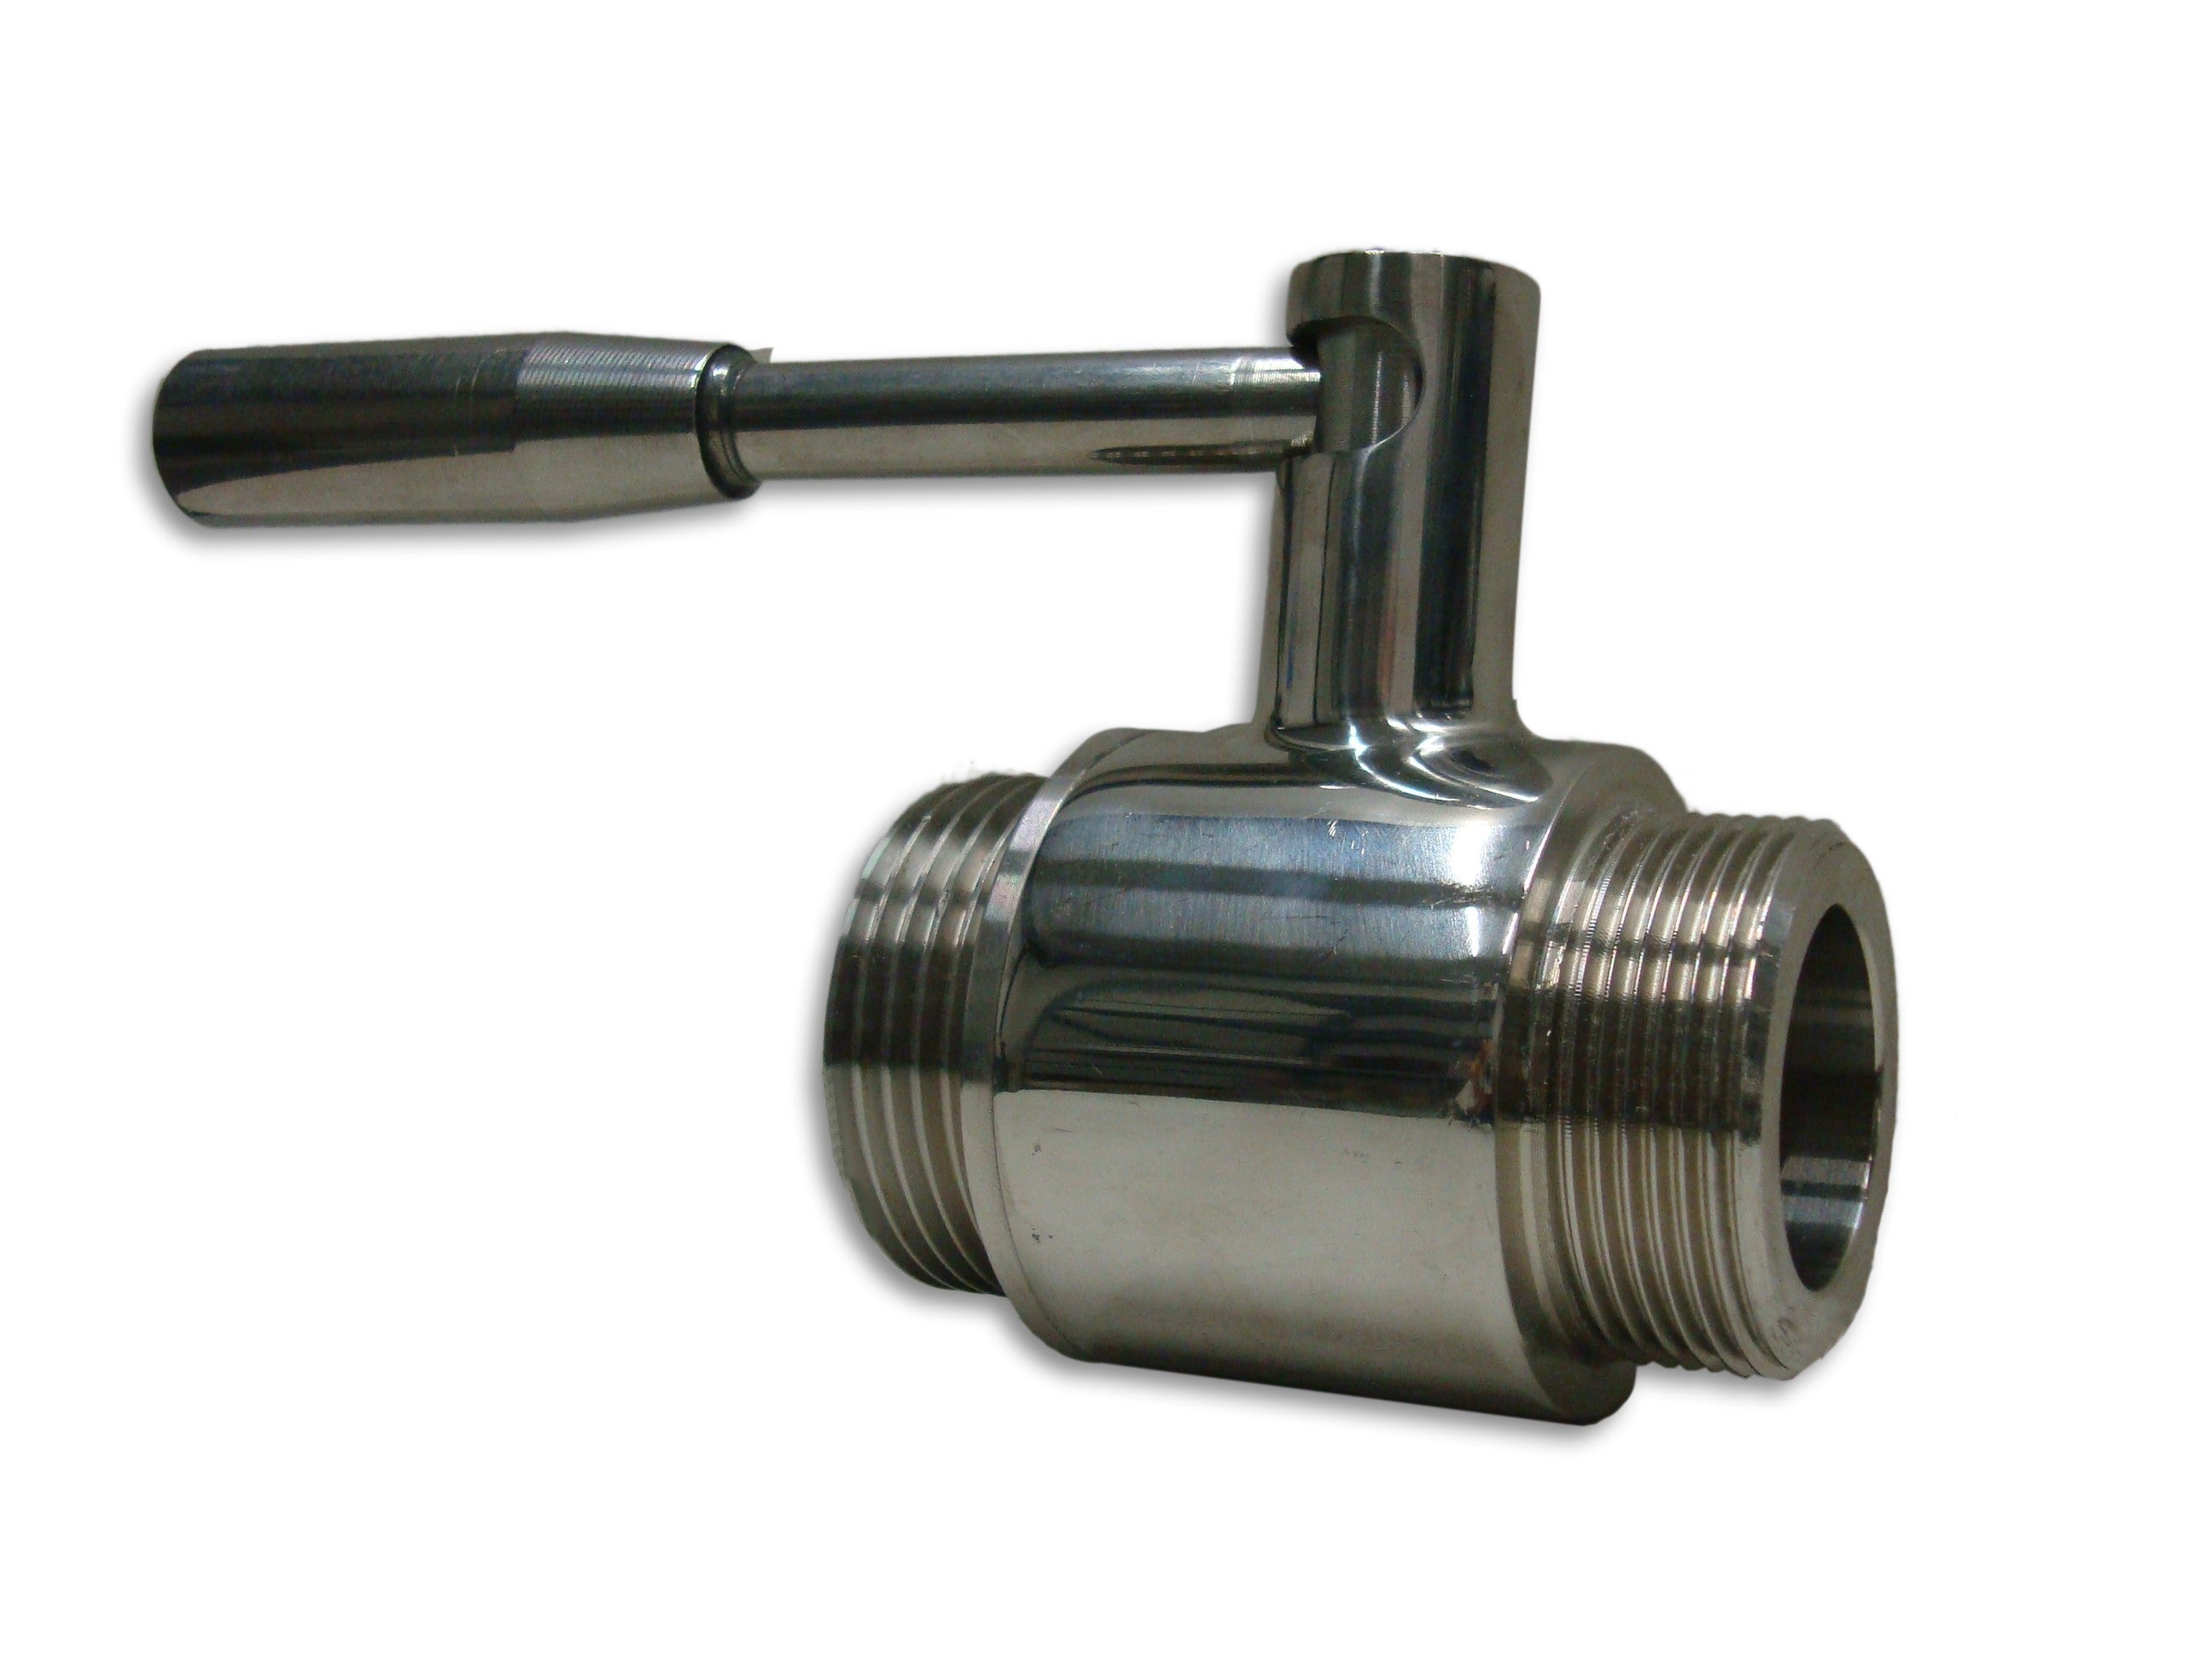 Steailess steel ball valve 3/4" with enological screw 30